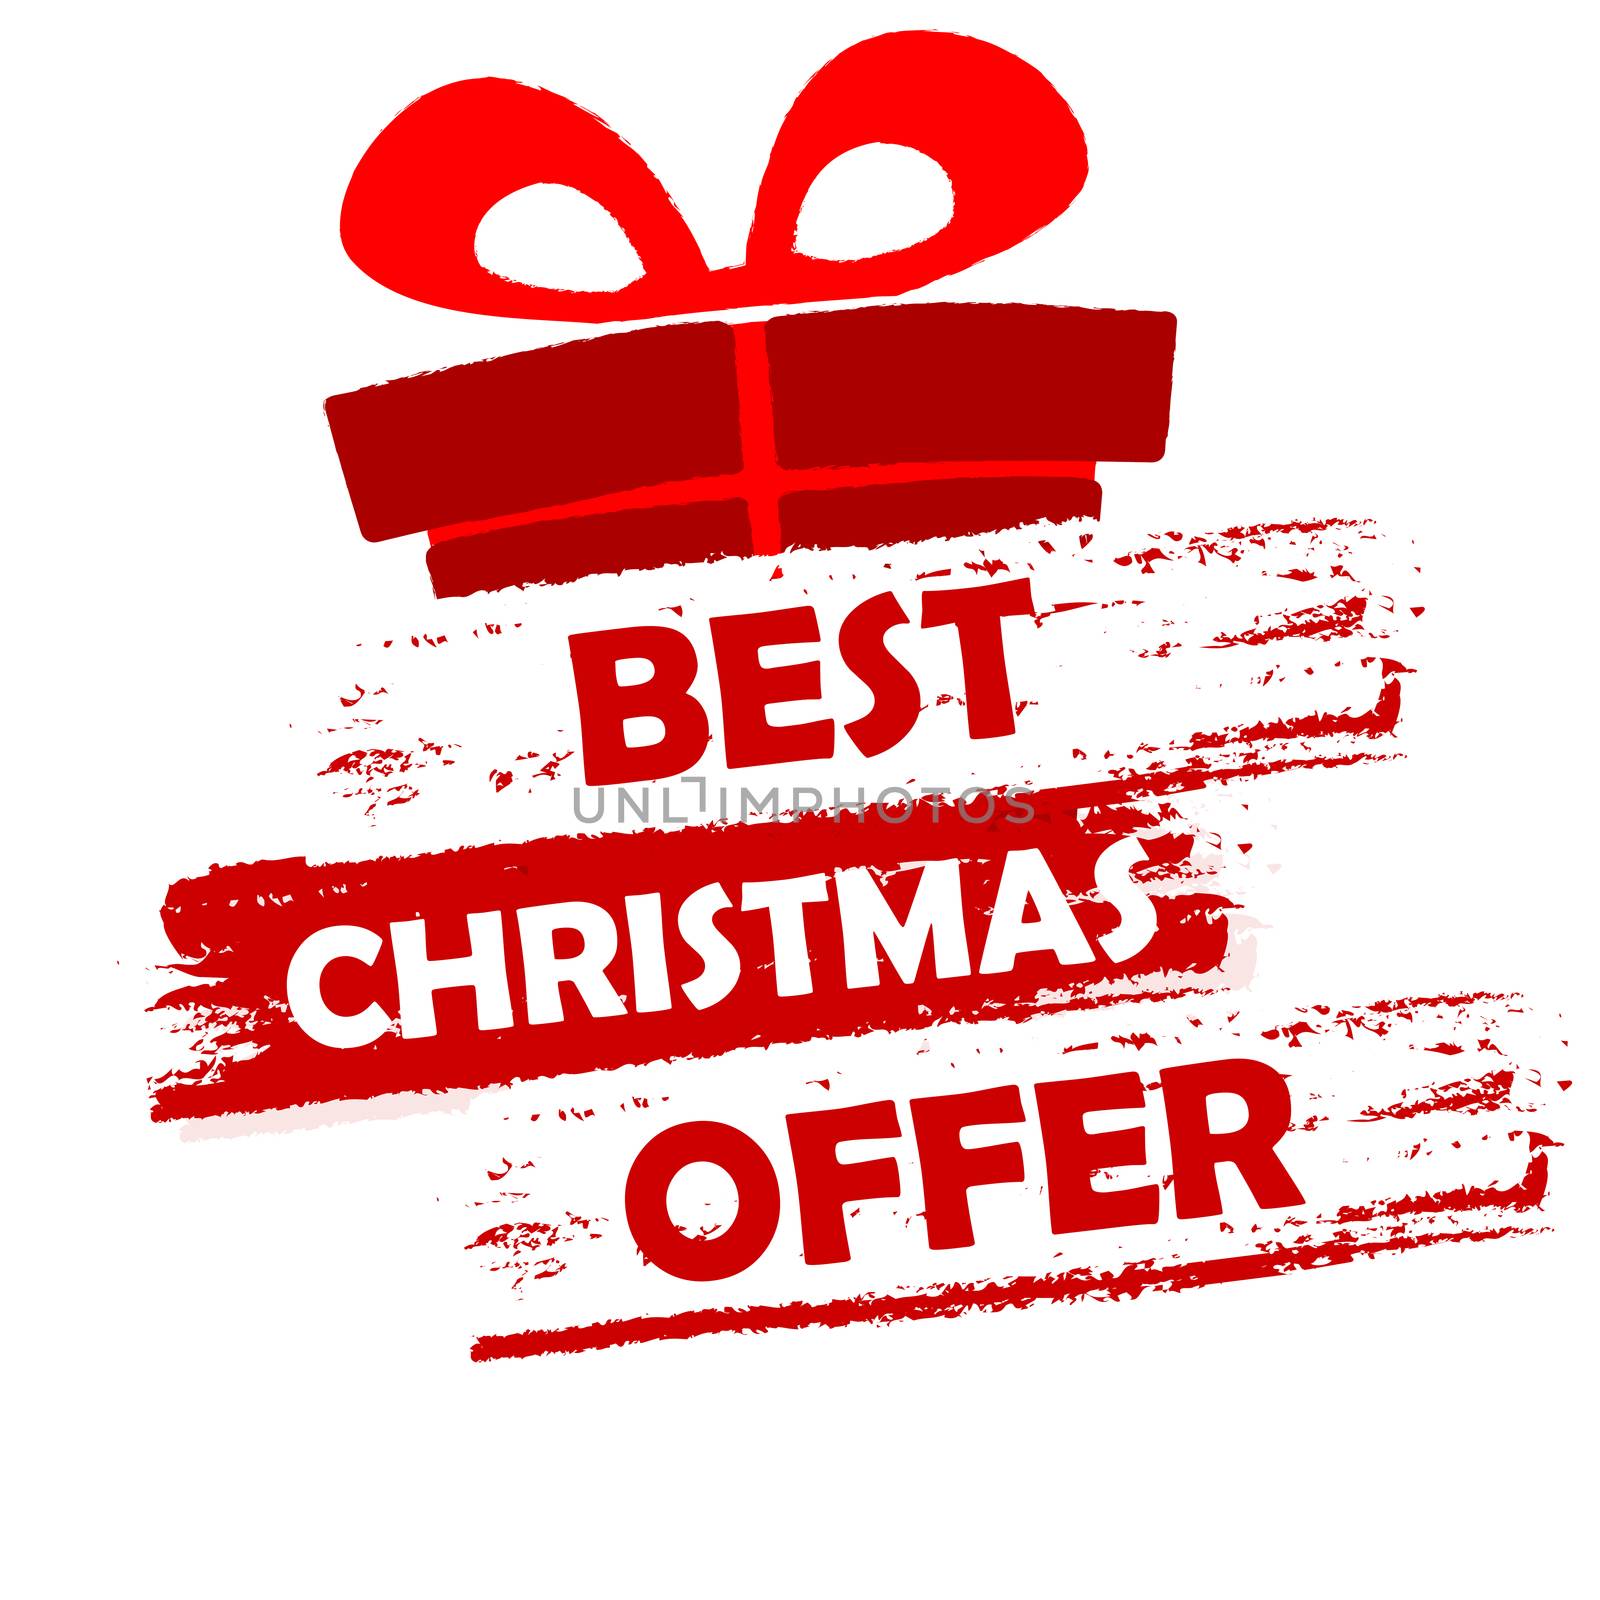 best christmas offer banner - text in red and white drawn label with gift symbol, business seasonal shopping concept